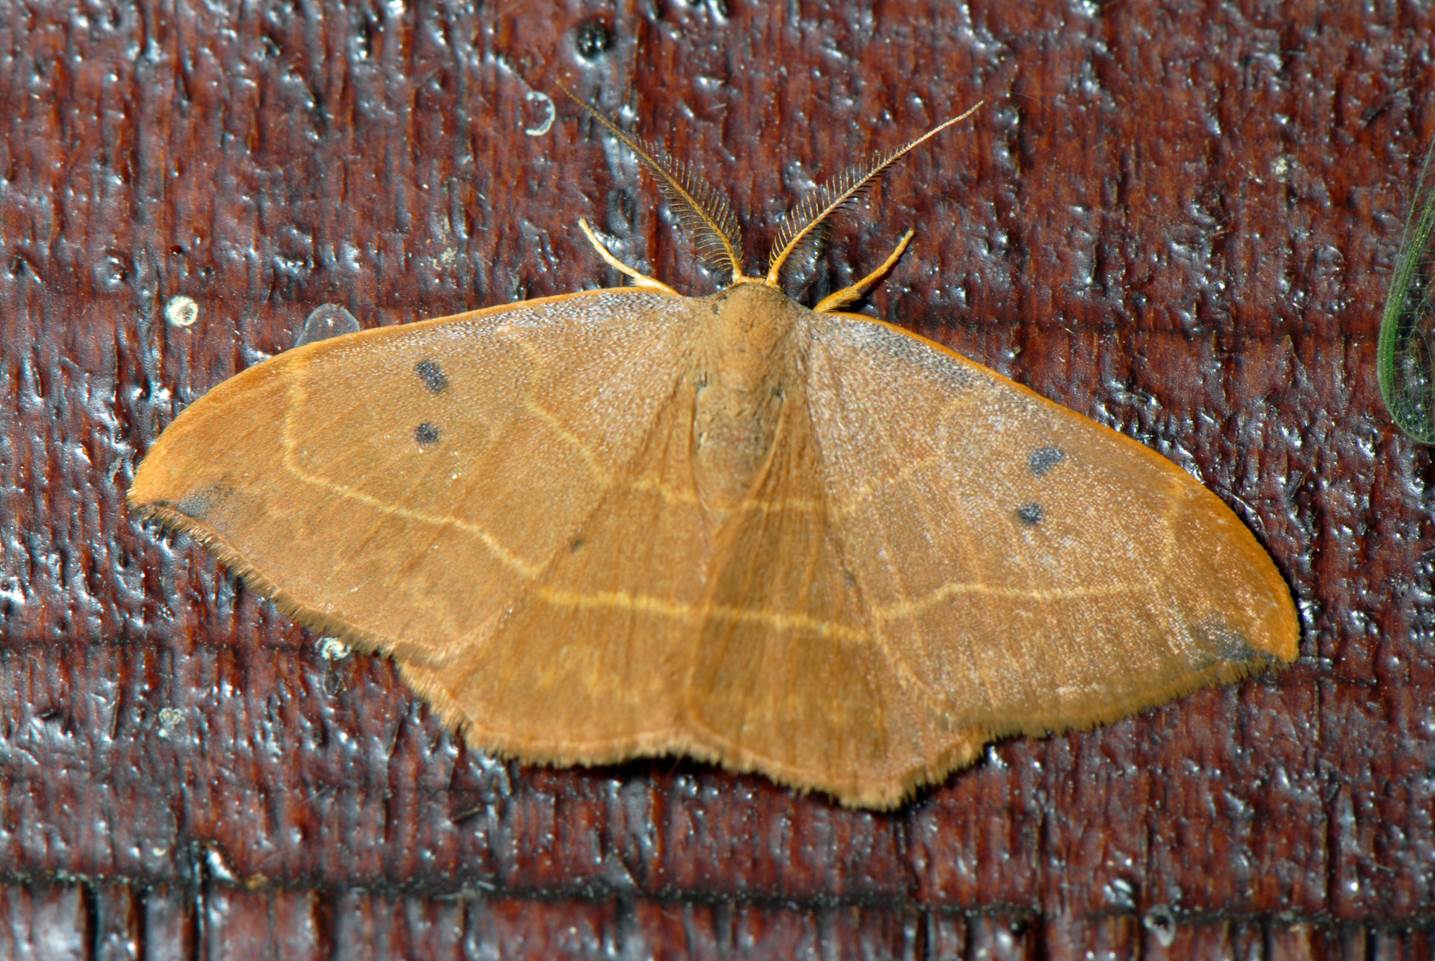 A moth on a wood surface

Description automatically generated